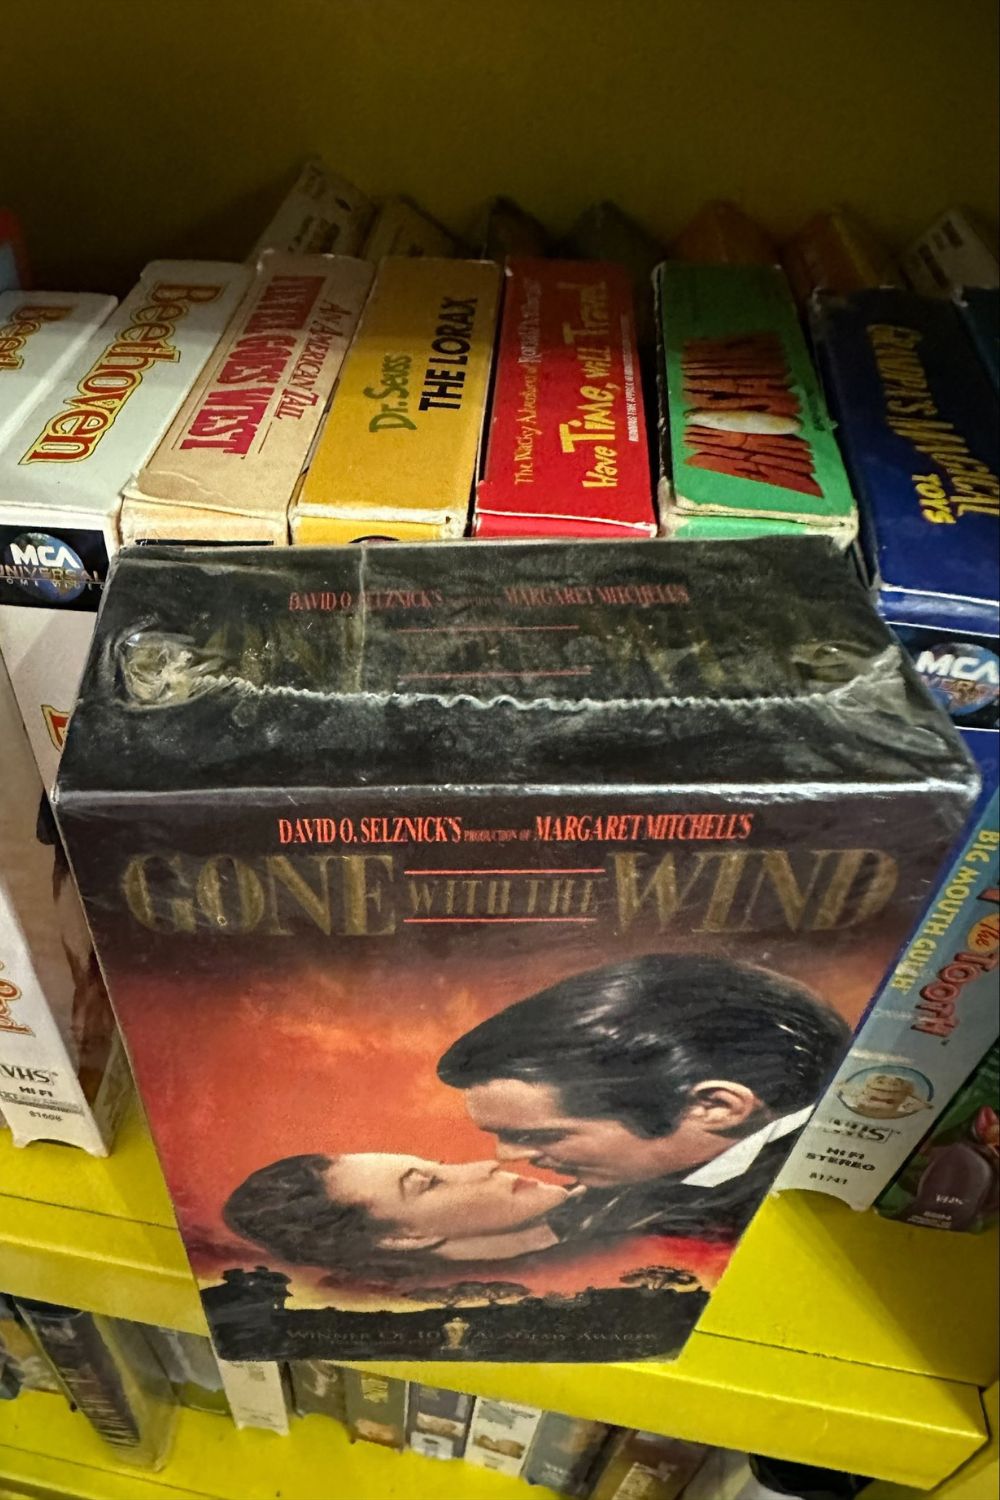 GONE WITH THE WIND VHS SET - SEALED*